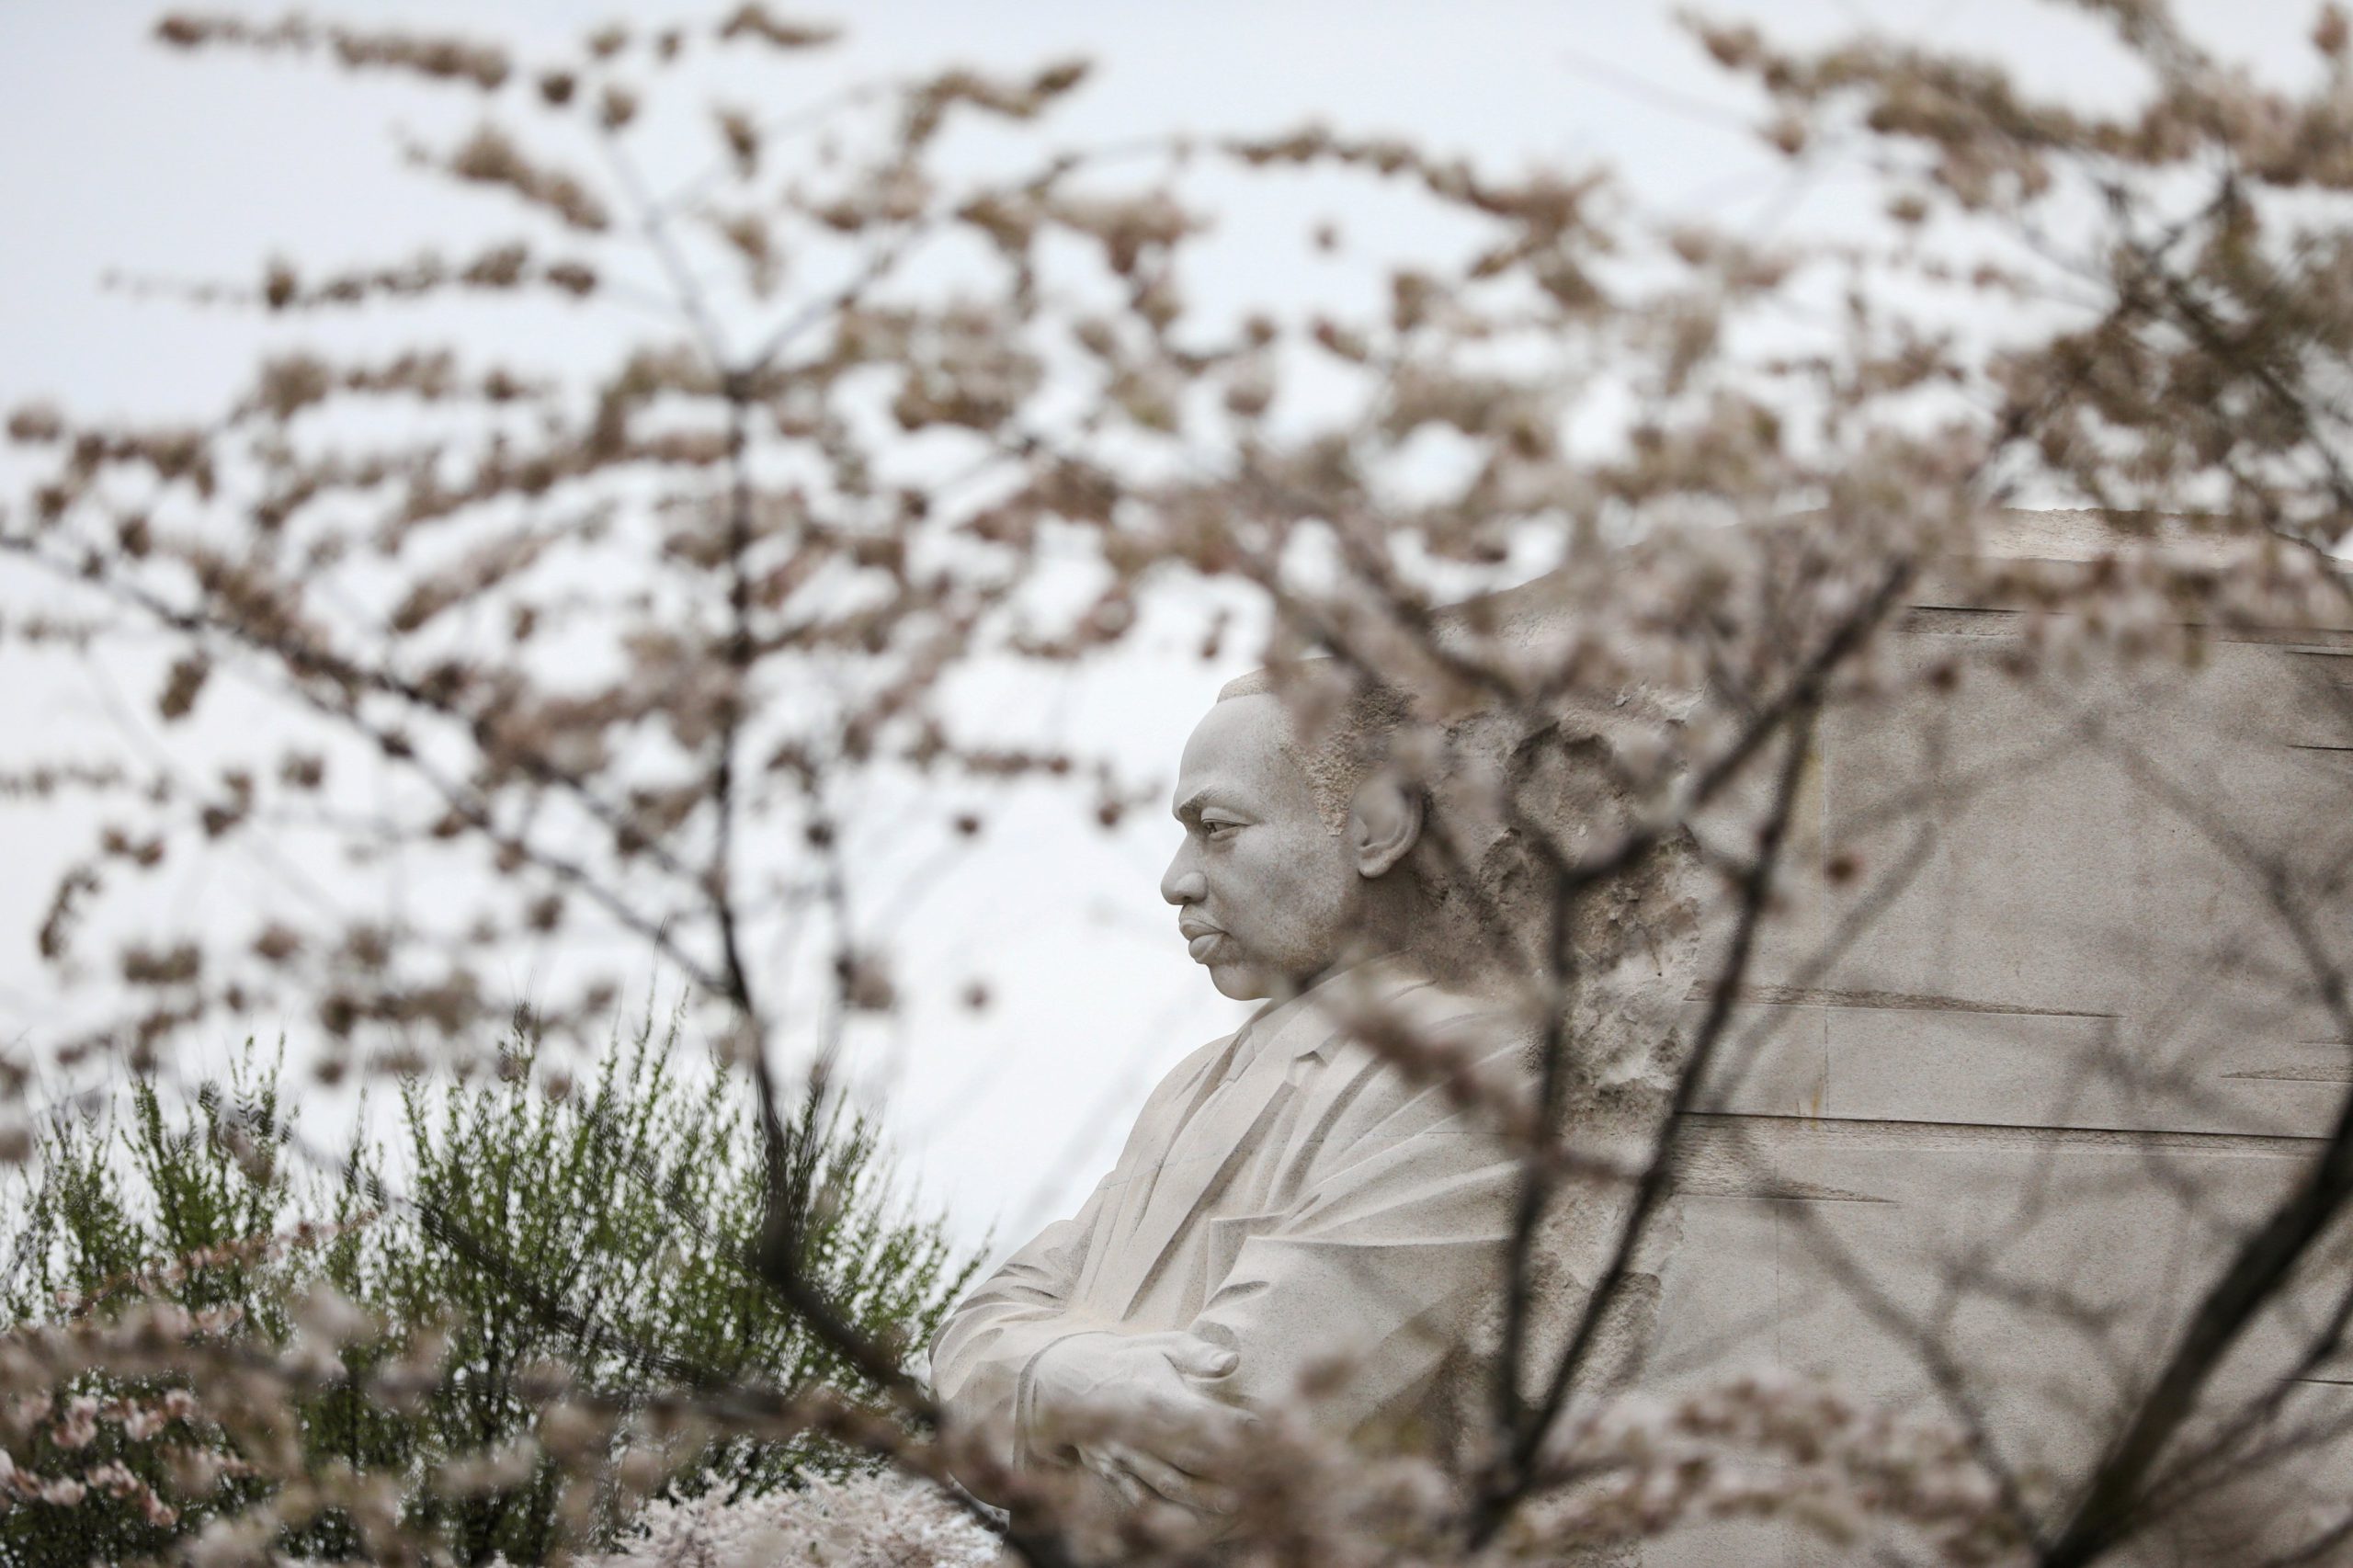 Blooming cherry blossoms surround the Martin Luther King Jr. Memorial in Washington March 27, 2021. (CNS photo/Cheriss May, Reuters)